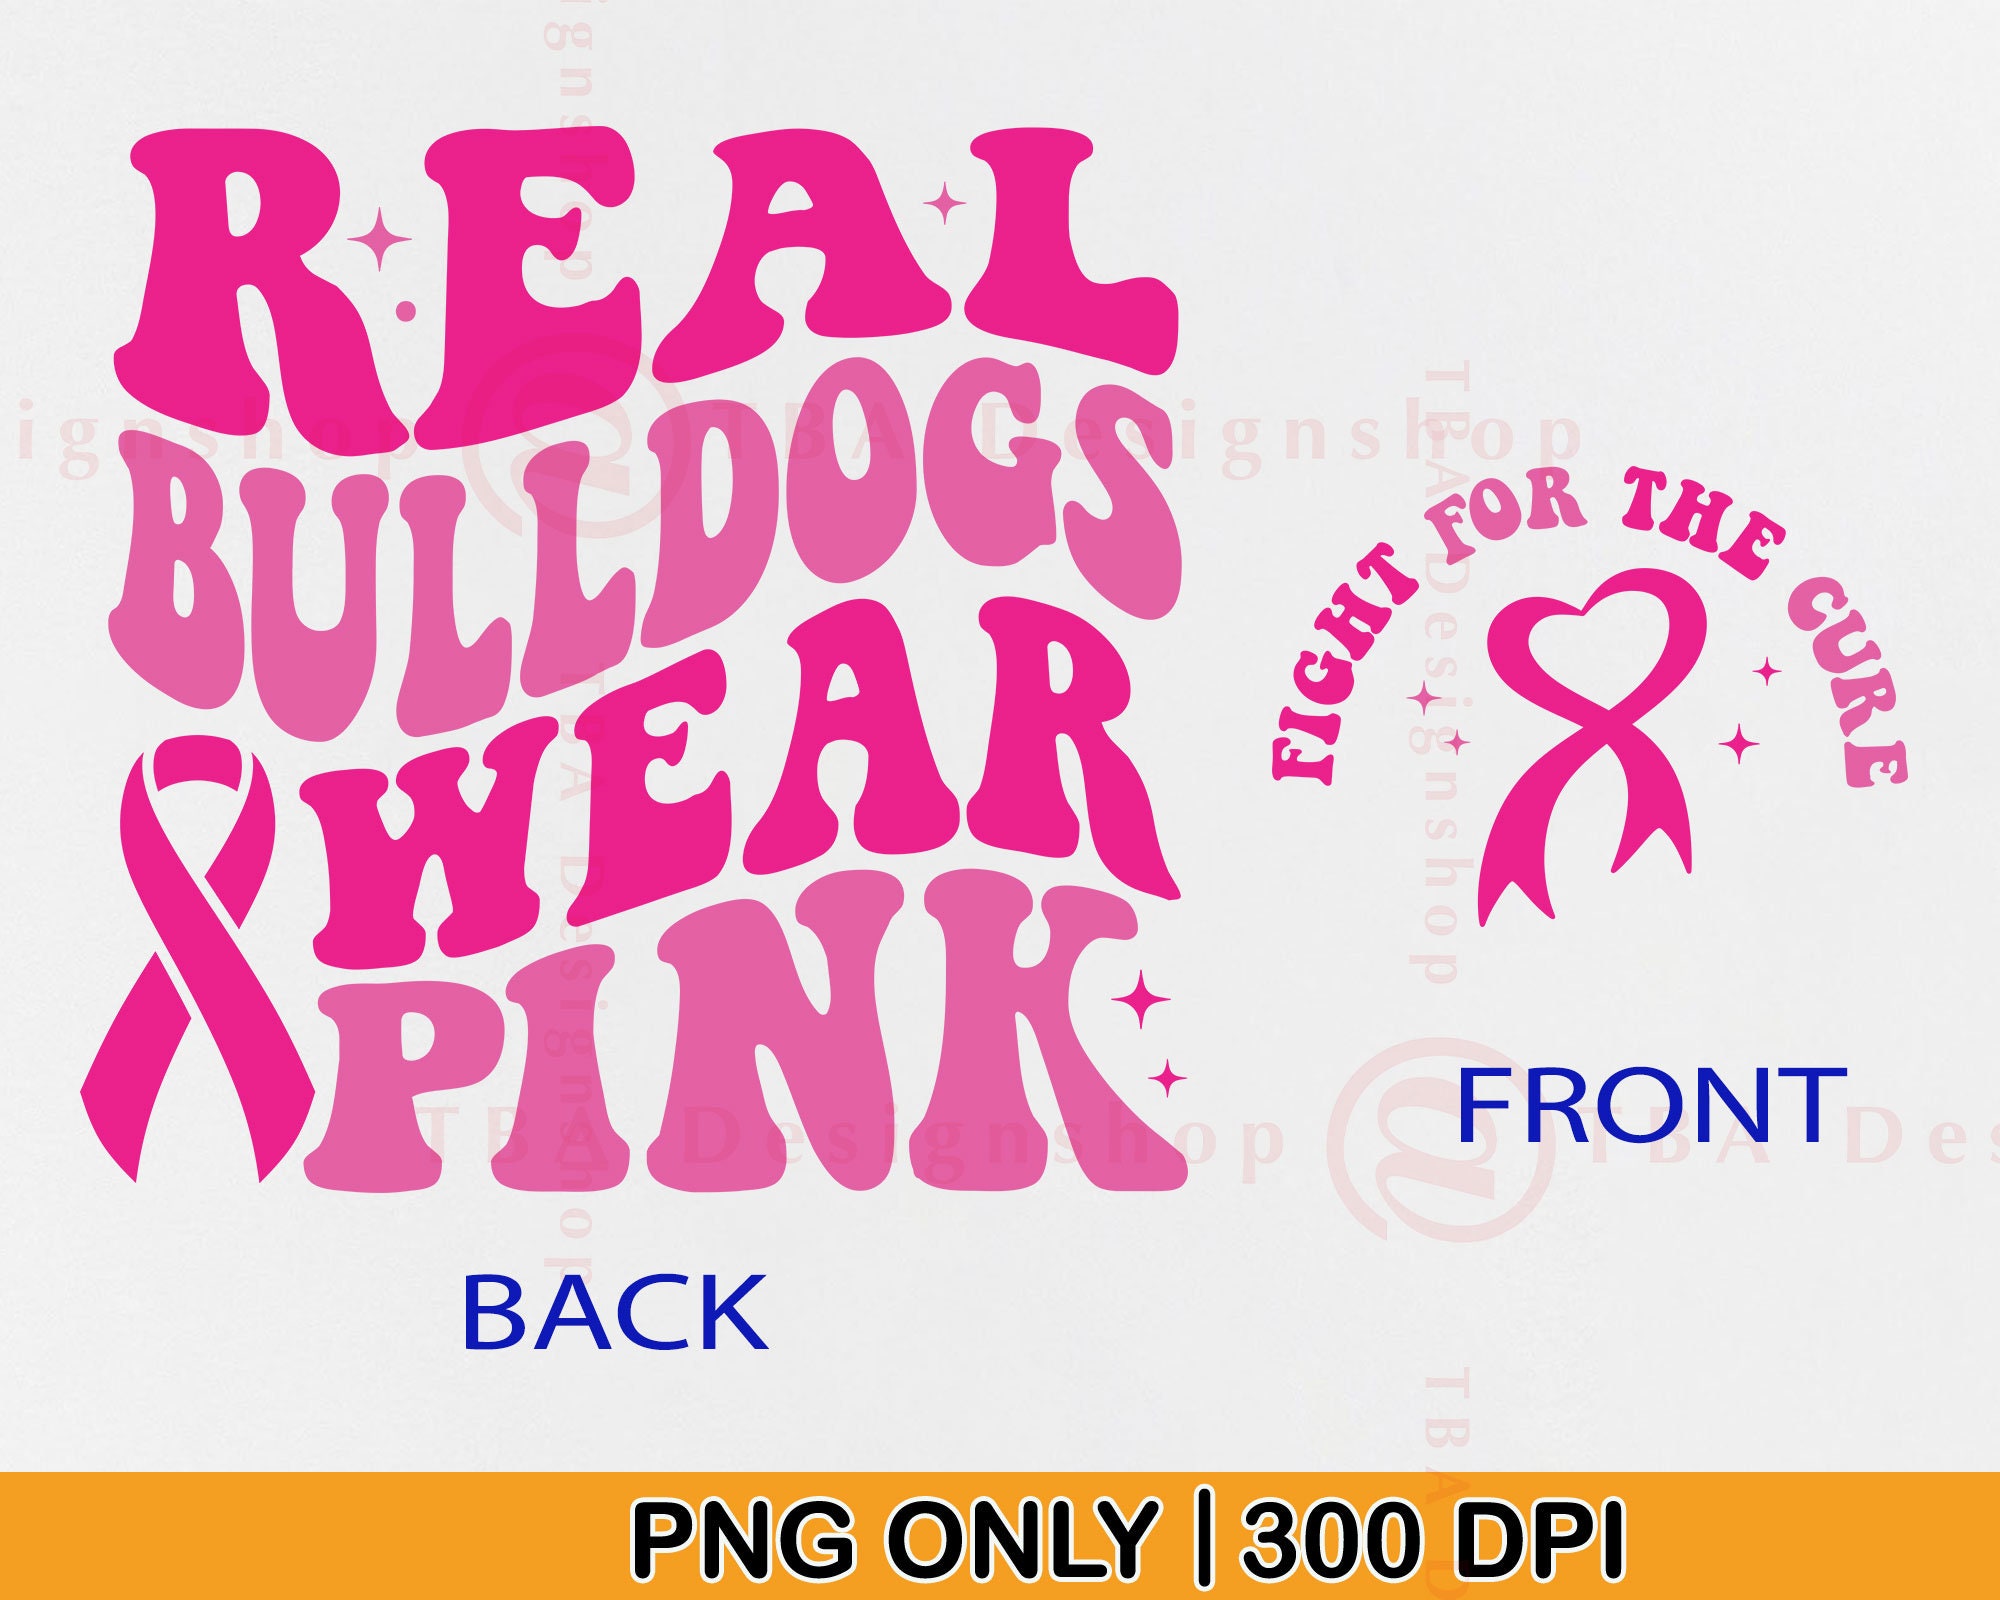 Breast Cancer Awareness SVG PNG Real Bulldogs Wear Pink picture